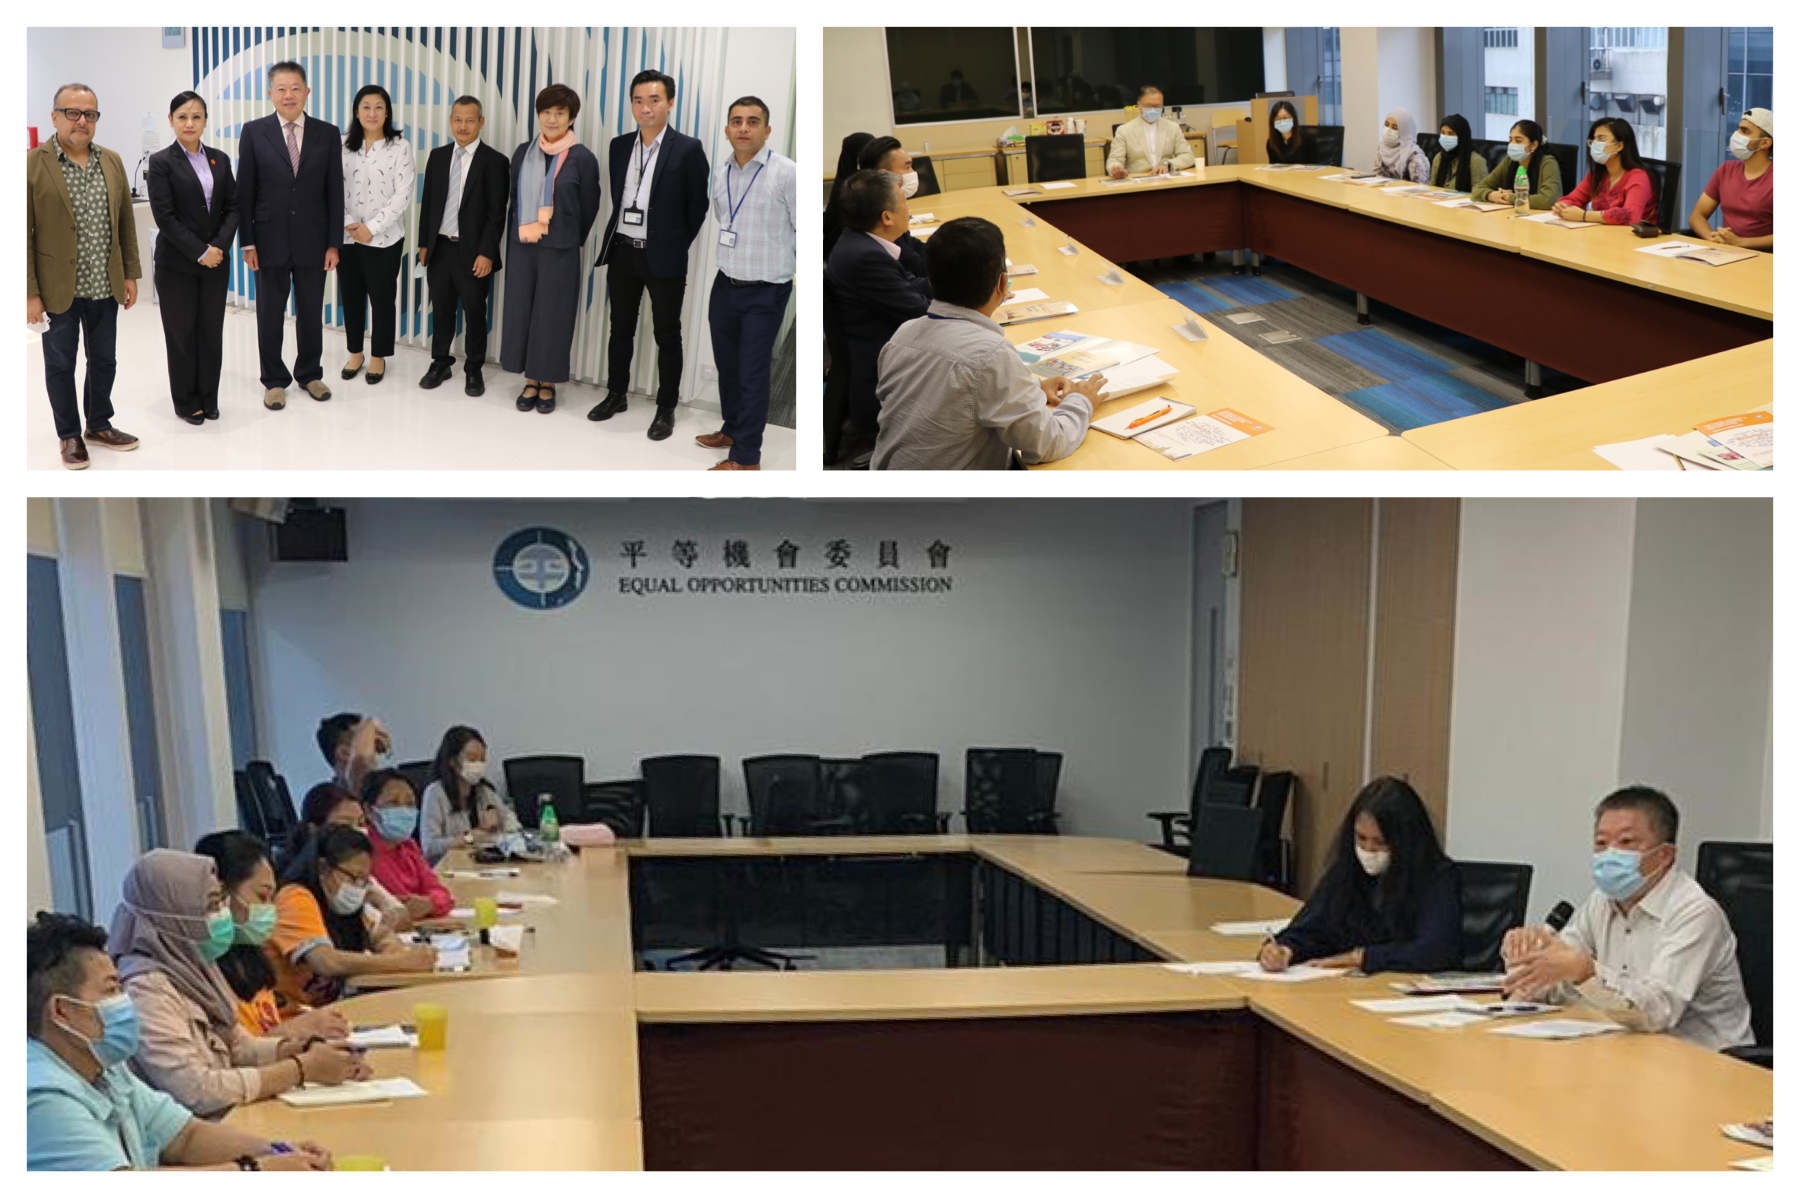 A collage of photos from meetings between EOC Chairperson, Mr Ricky CHU and representatives of different ethnic minority communities